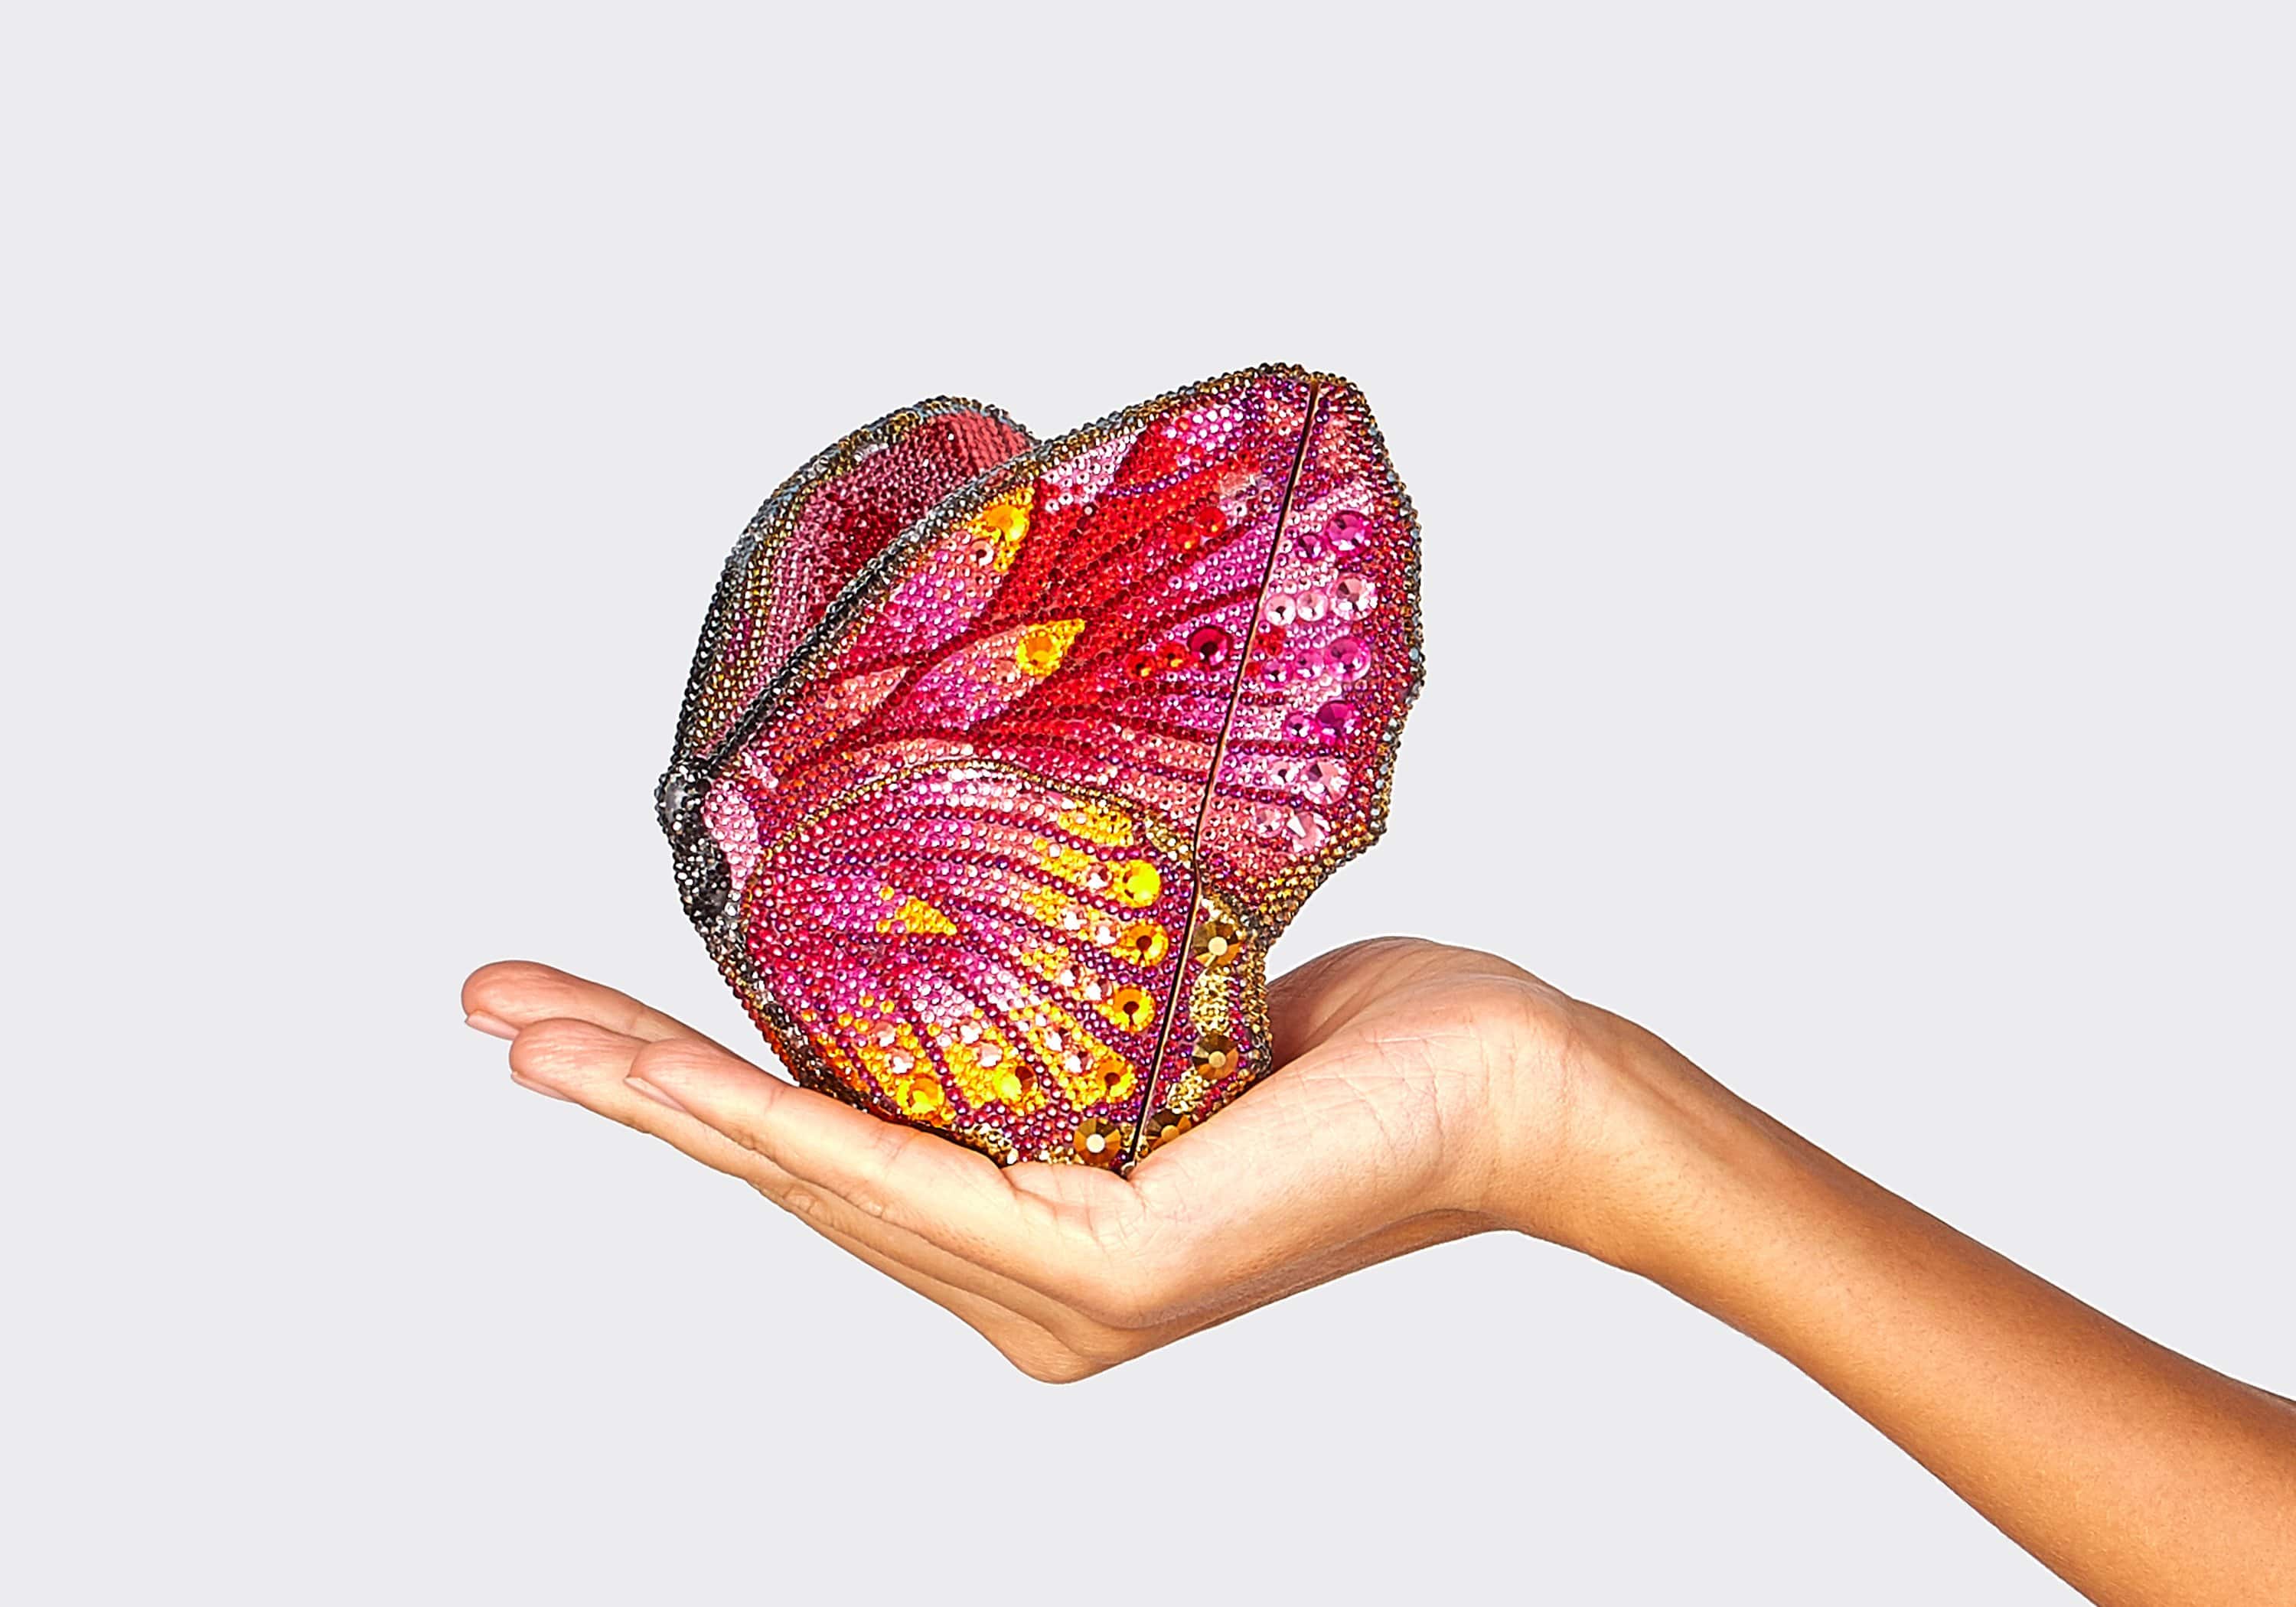 Judith Leiber Butterfly Crystal Minaudiere Bag | Judith leiber bags,  Leather evening bags, Butterfly bags